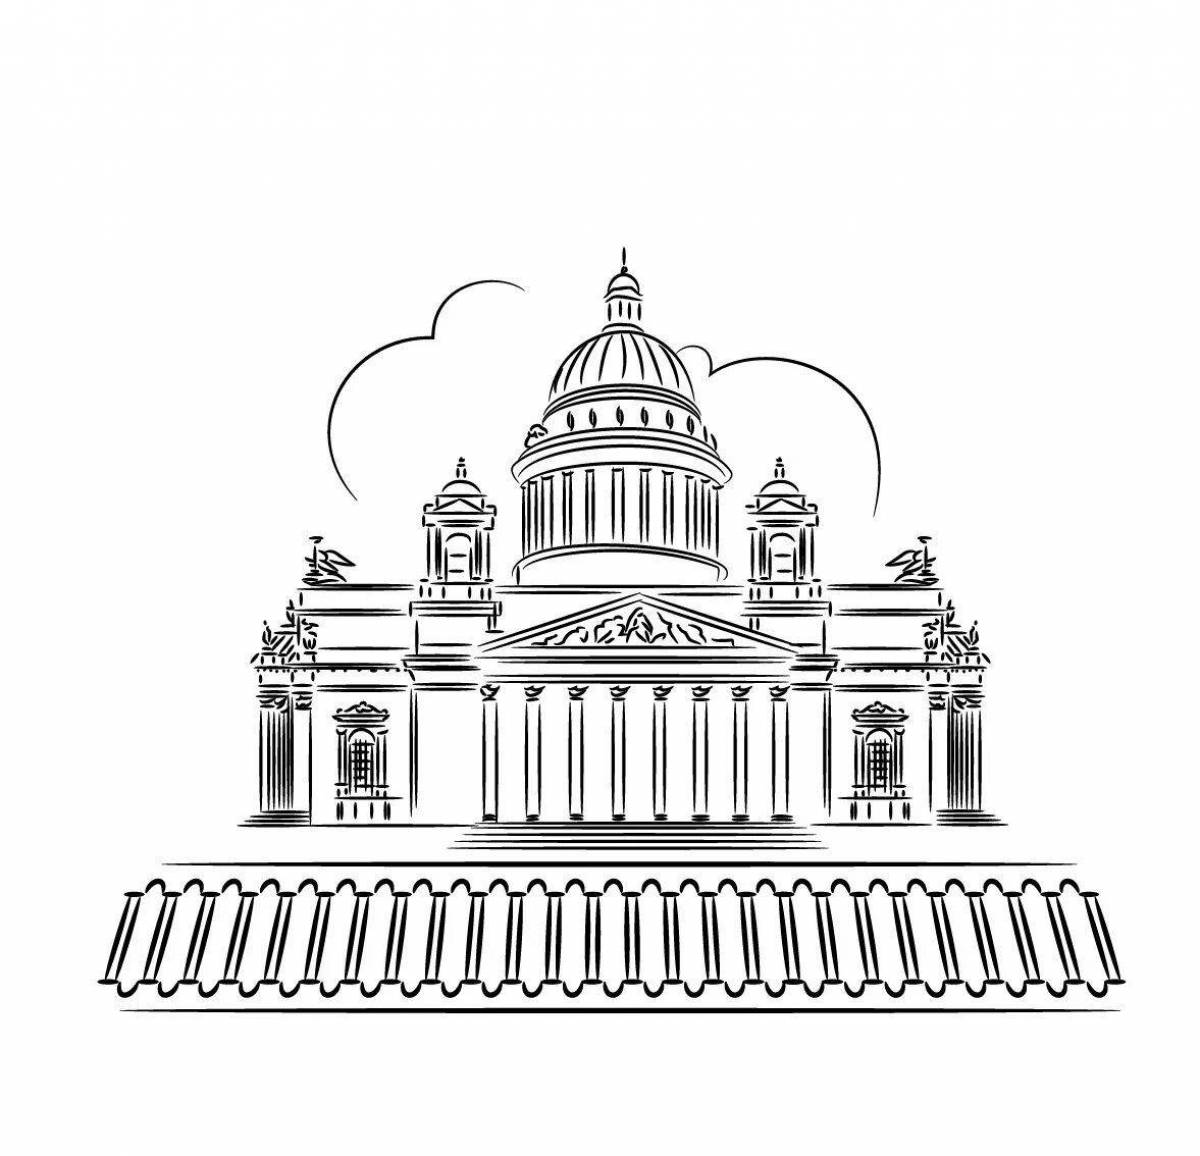 Fabulous Kazan Cathedral coloring book for children